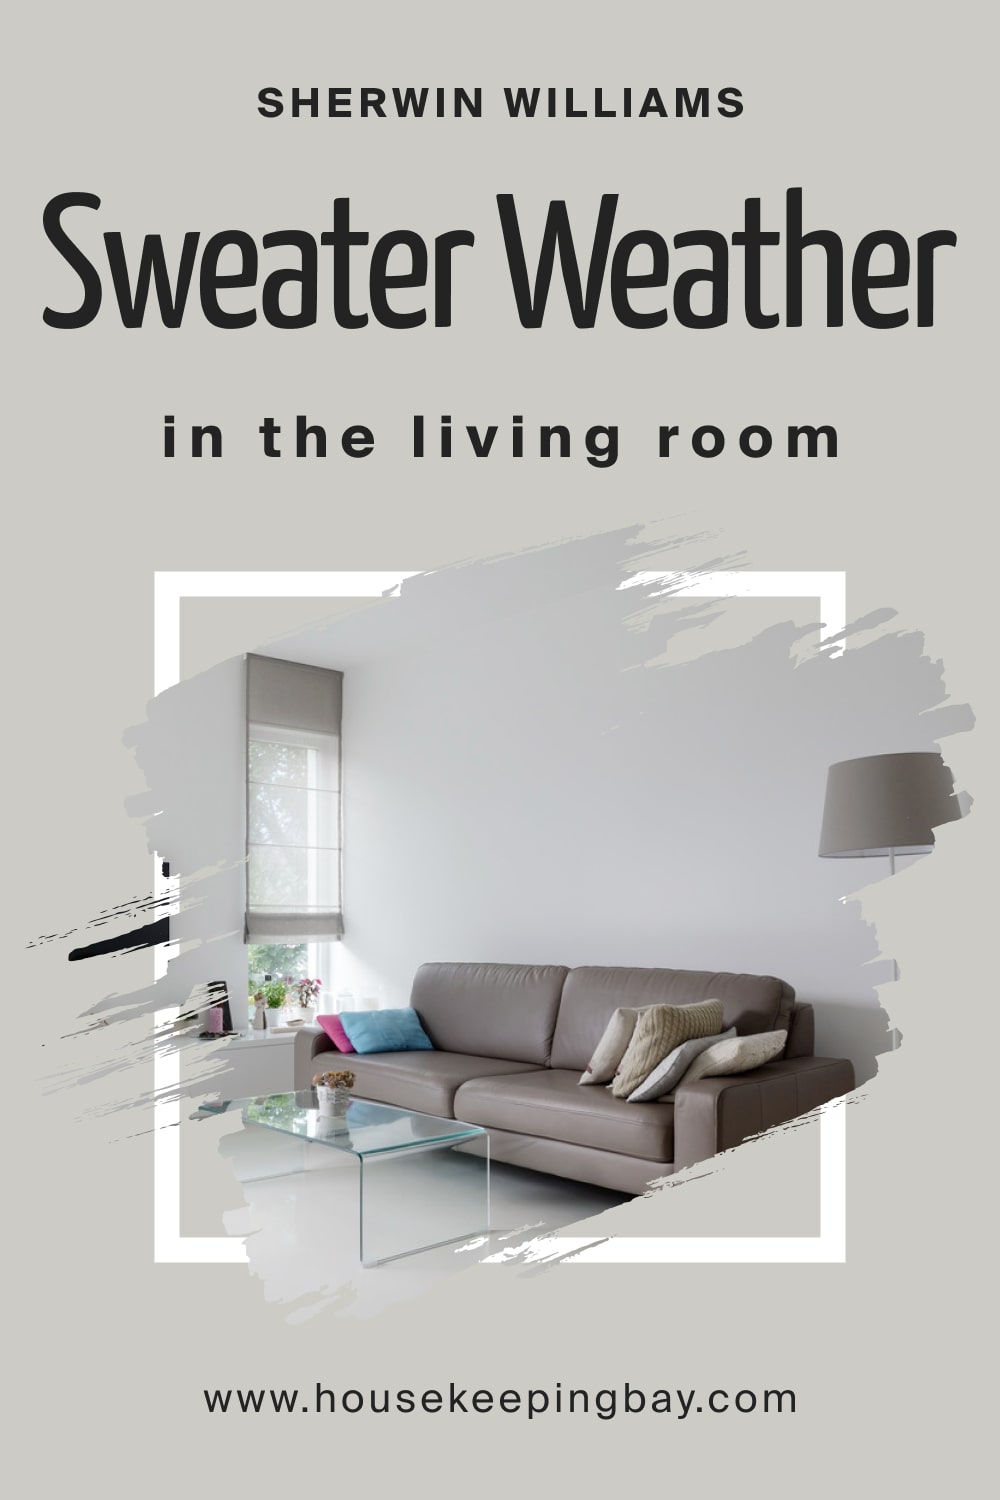 Sherwin Williams.Sweater Weather SW 9548 In the Living Room